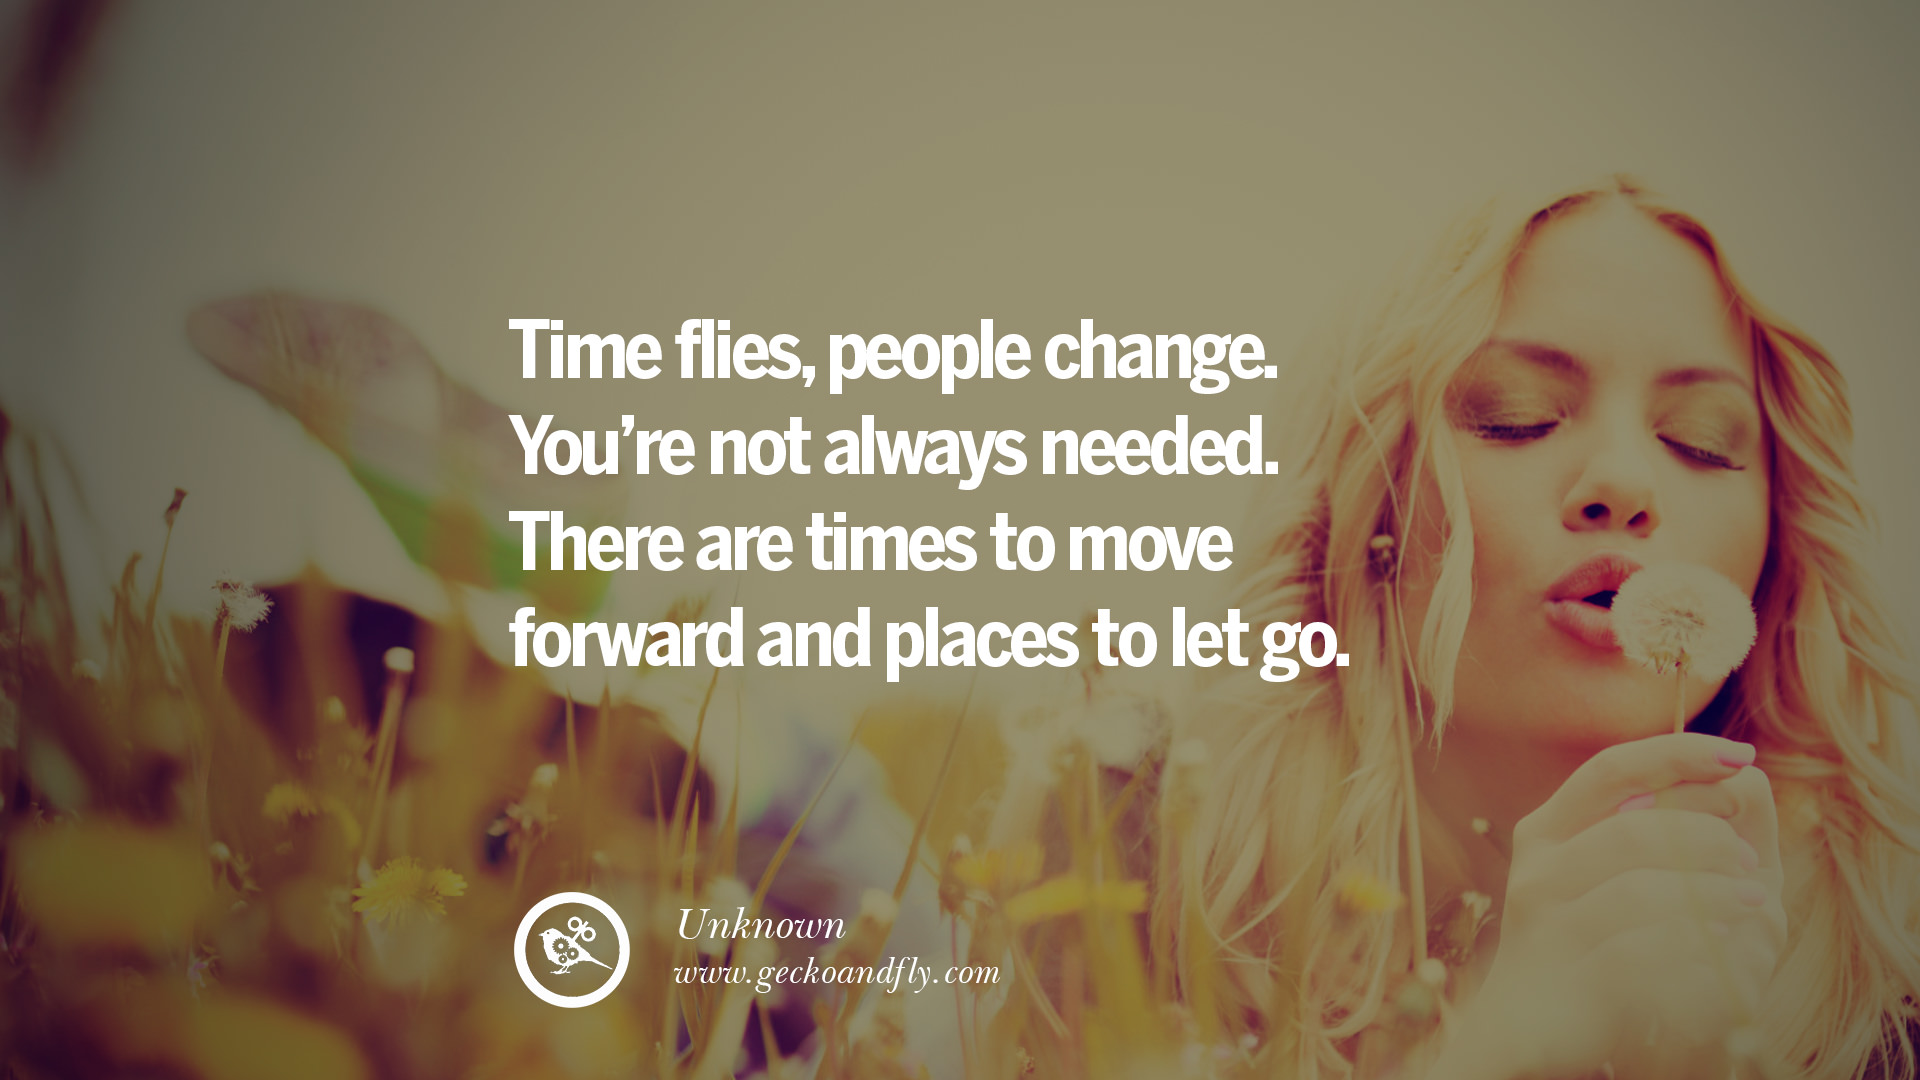 More people are flying. Картинка it`s time to move on. Let people go quotes. People change. Quotes about moving.